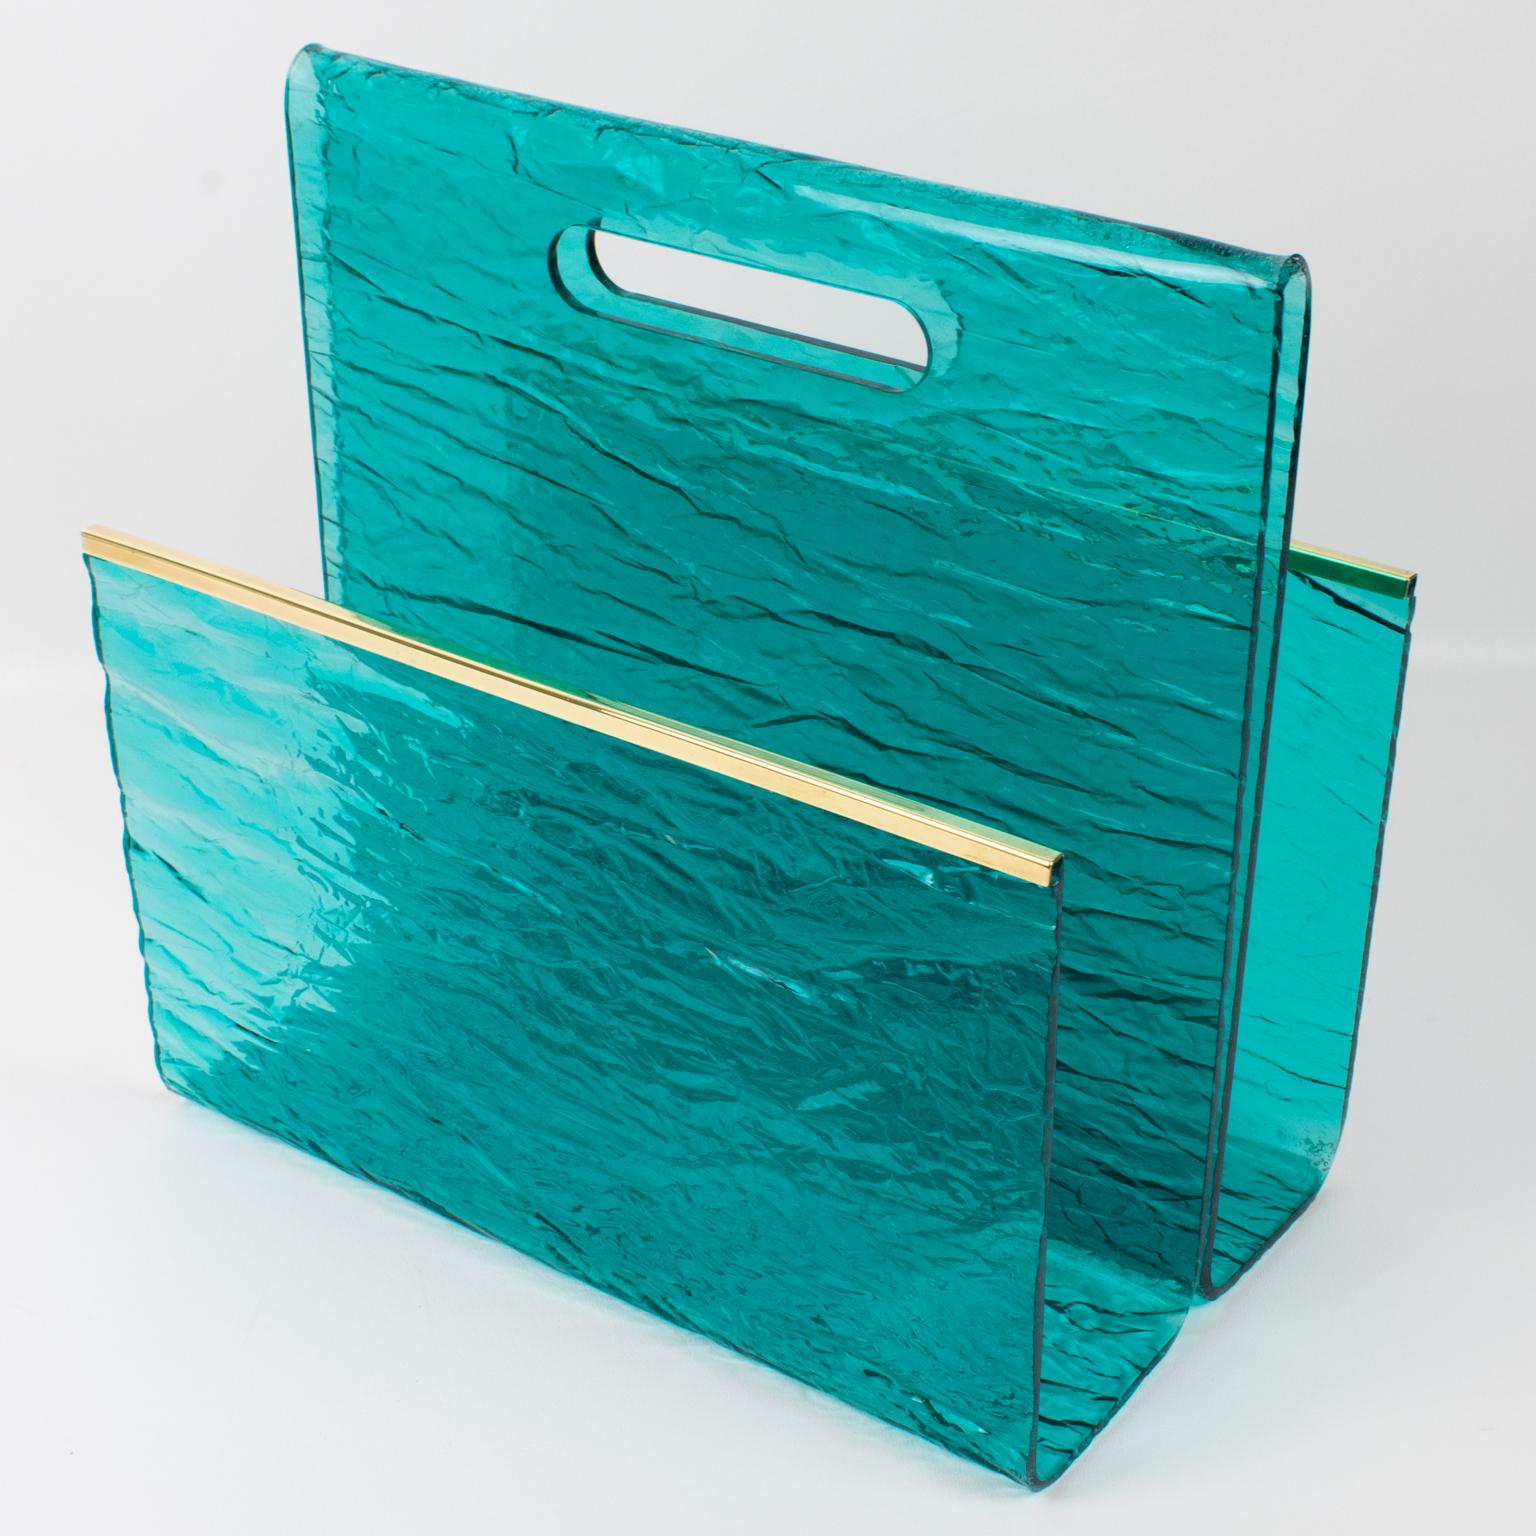 This handsome 1970s modernist magazine rack or holder has its design attributed to Willy Rizzo. The geometric shape boasts a gilded brass metal gallery and turquoise blue-lagoon textured pattern Lucite. The crystal transparent Lucite has a stunning